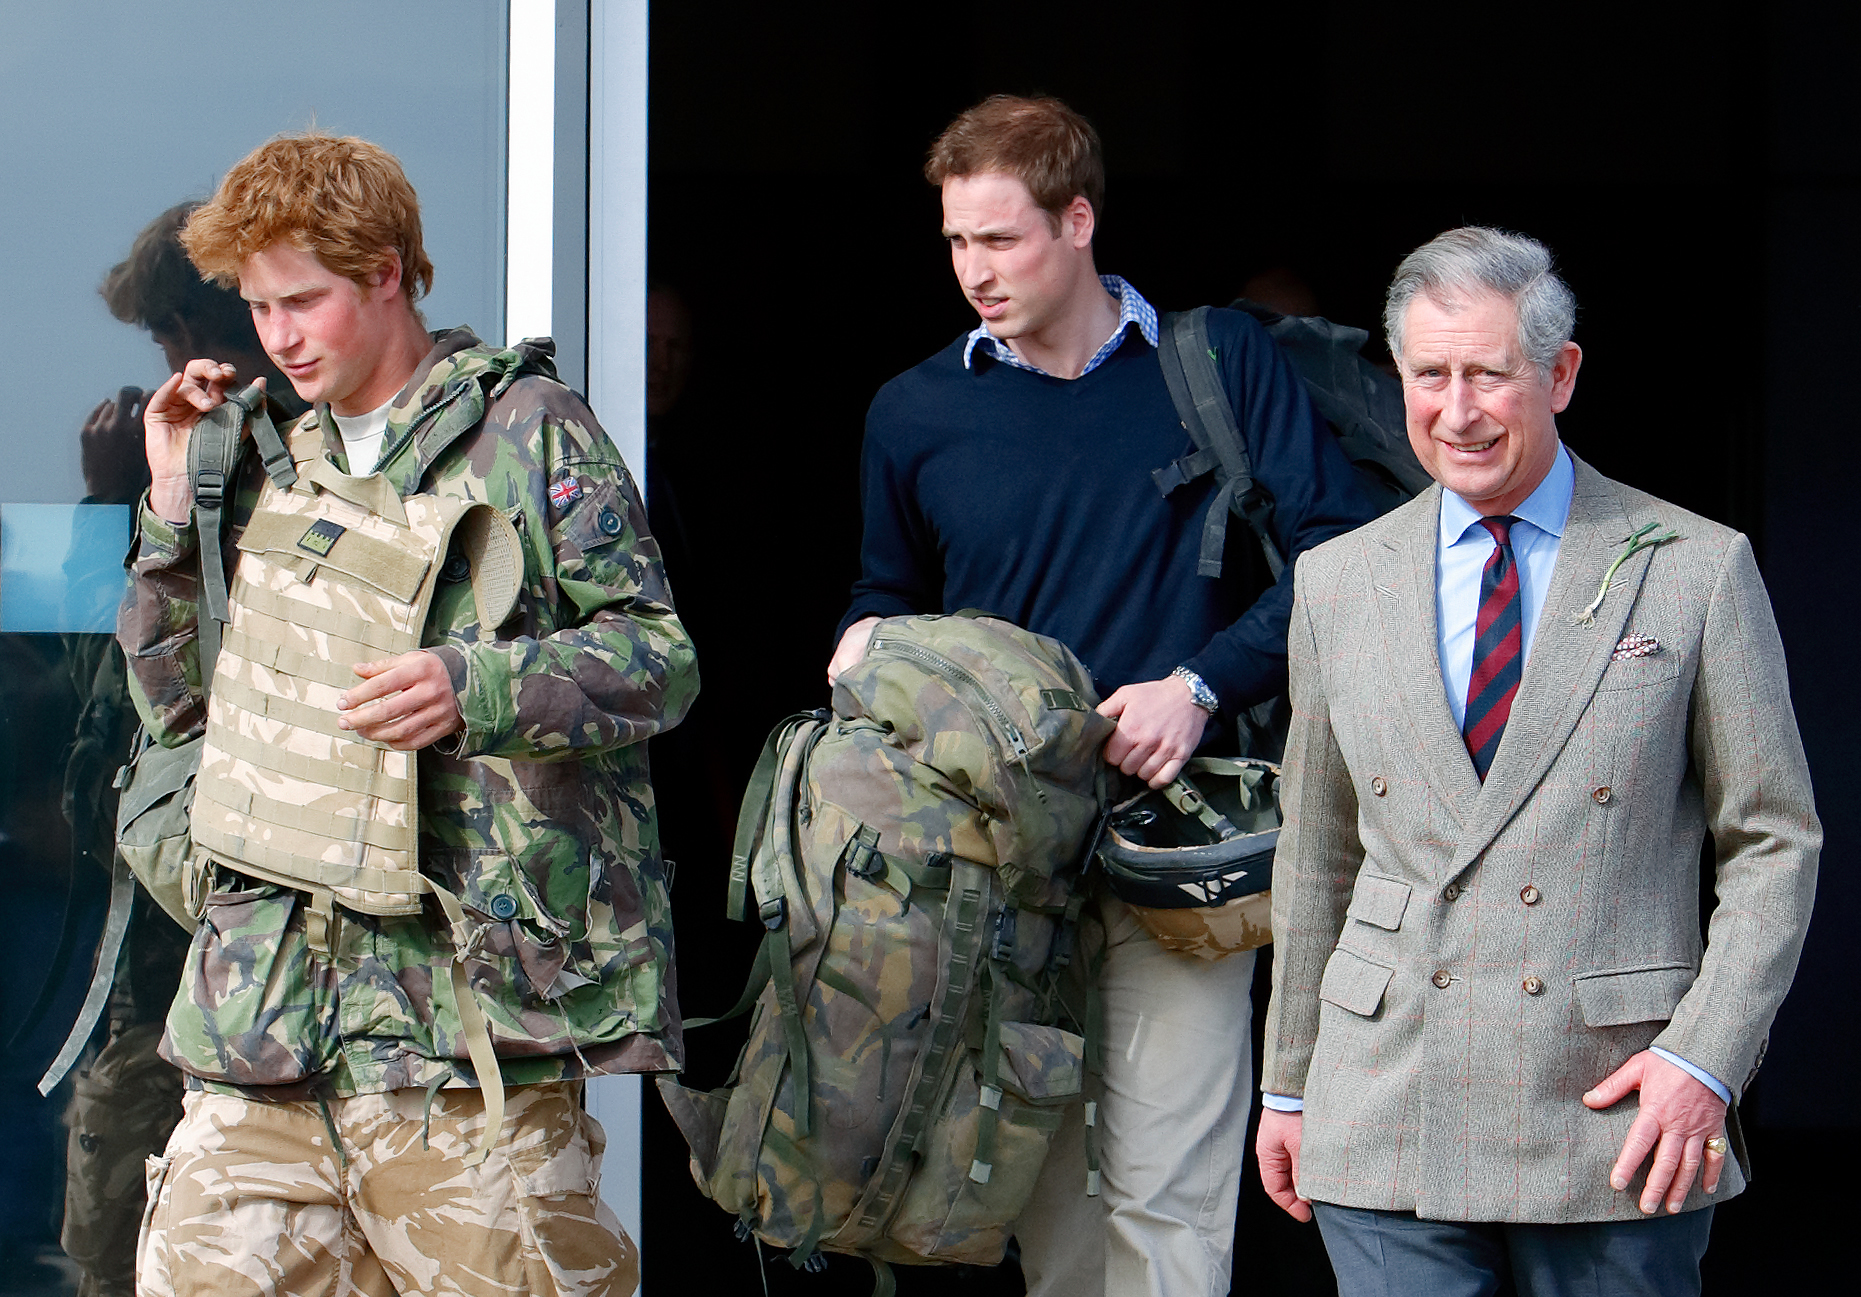 Prince Harry, carrying his rucksack as he returns from Afghanistan accompanied by Prince William and Prince Charles